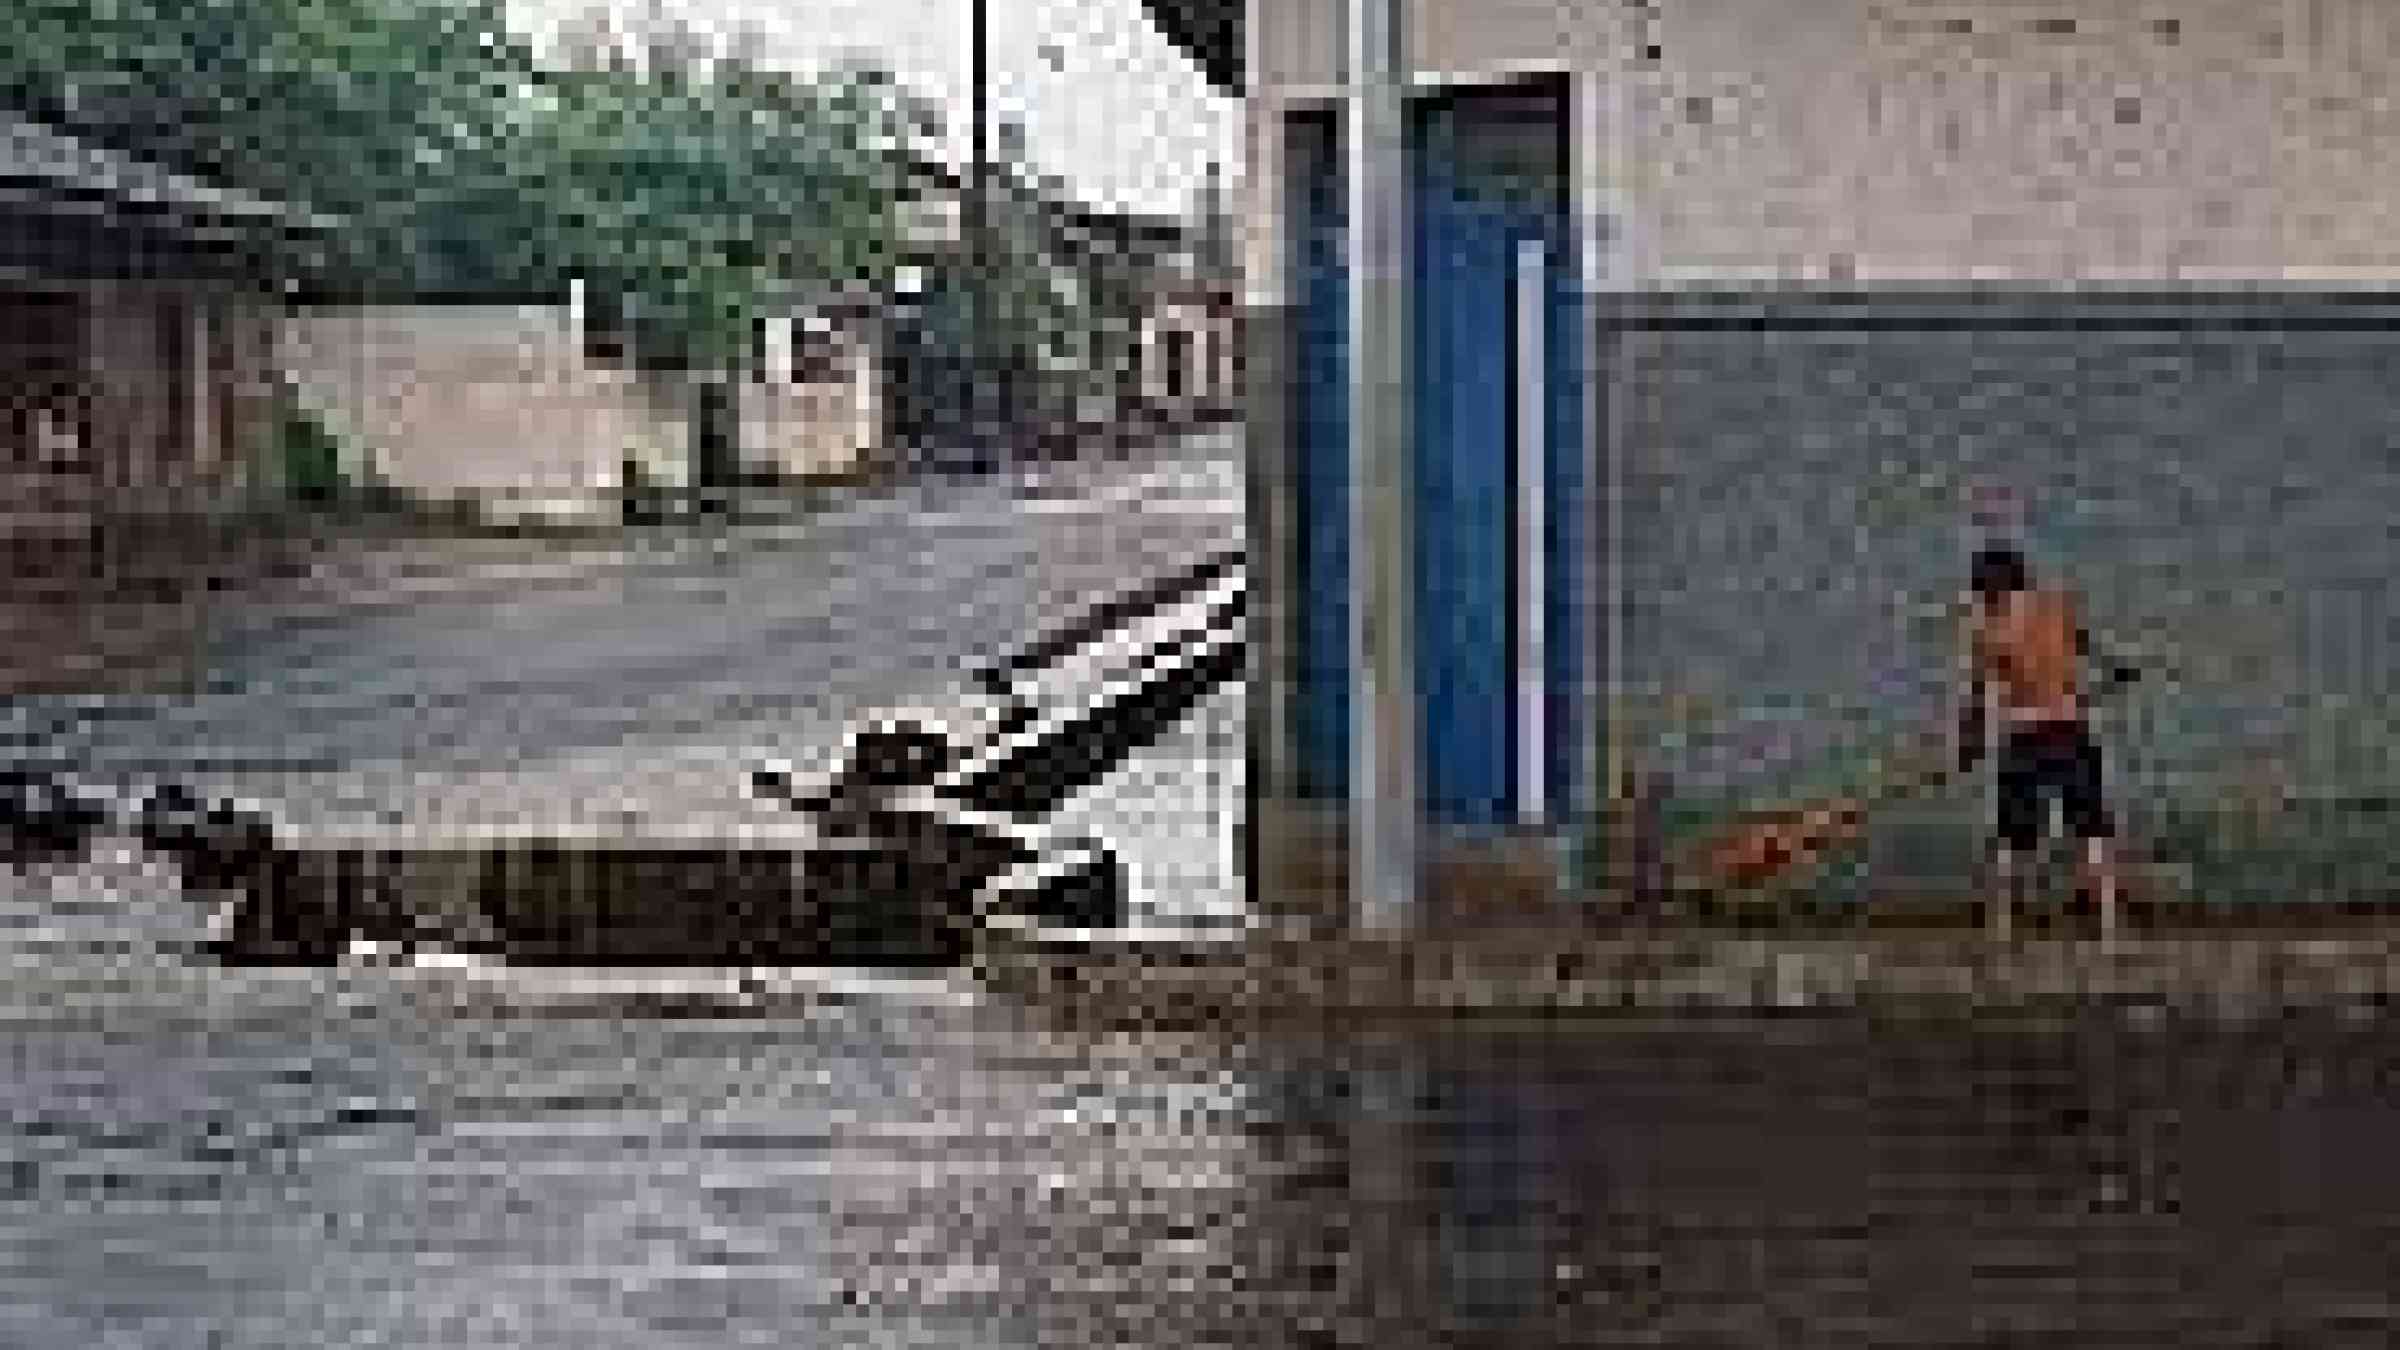 Photo of floods in Managua by Flickr user, William Verbeek, Creative Commons Attribution-NonCommercial 2.0 Generic  (CC BY-NC 2.0) http://www.flickr.com/photos/william_veerbeek/3550531555/